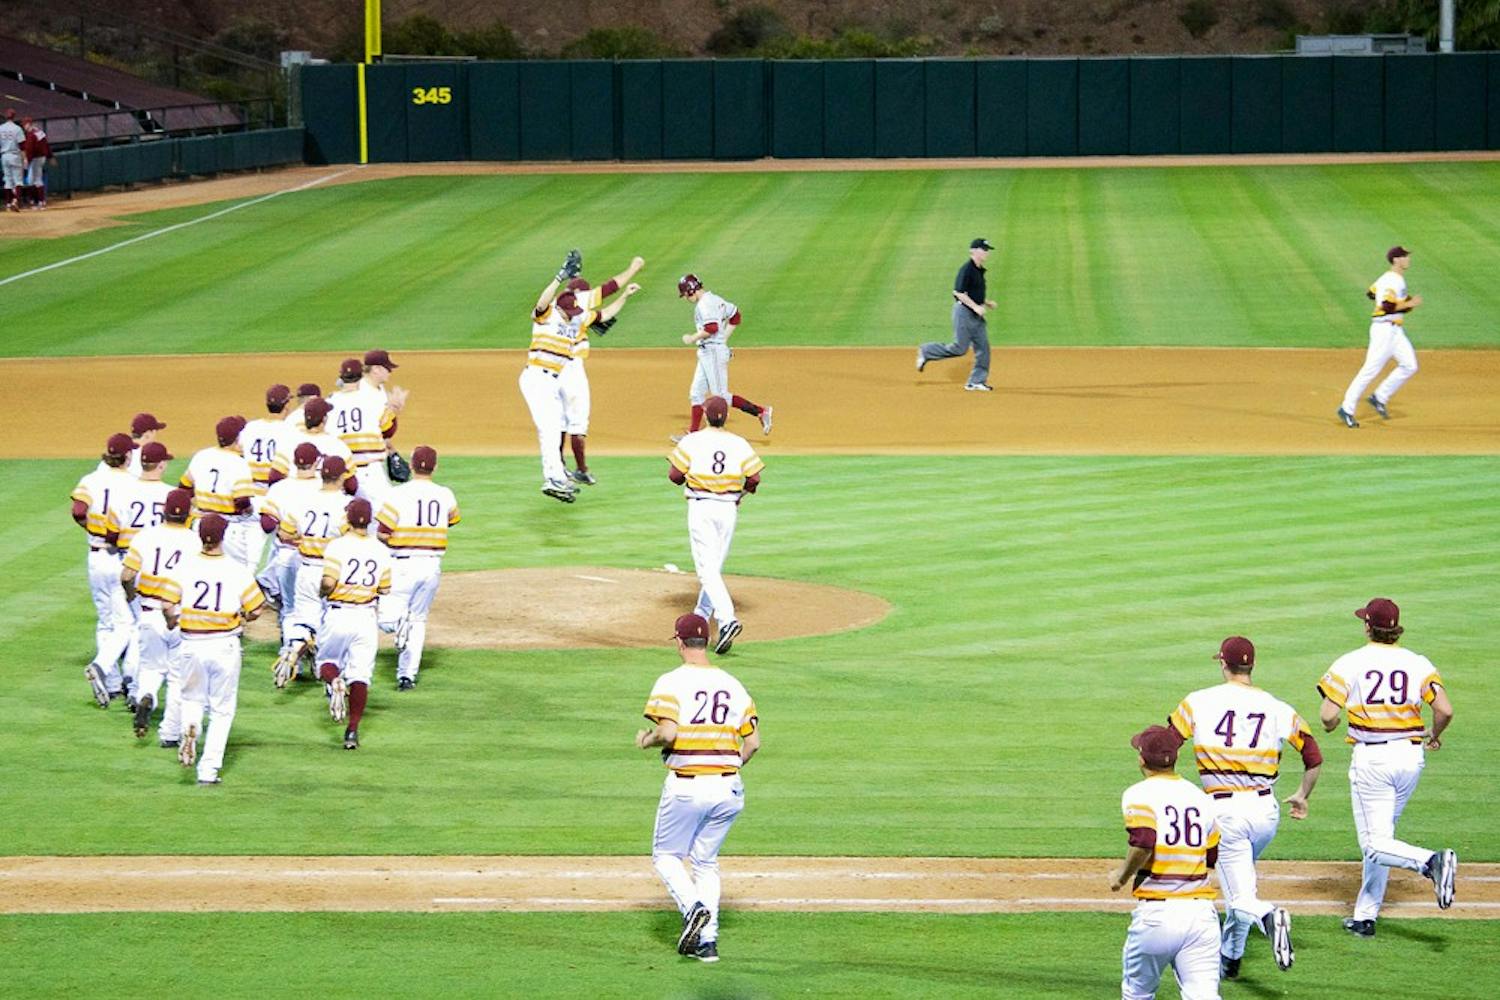 Sun Devils storm the field after their victory against Stanford, Saturday, March 28, 2015, at Phoenix Municipal Stadium. The Sun Devils defeated the Cardinal 6-3. (Krista Tillman/The State Press)